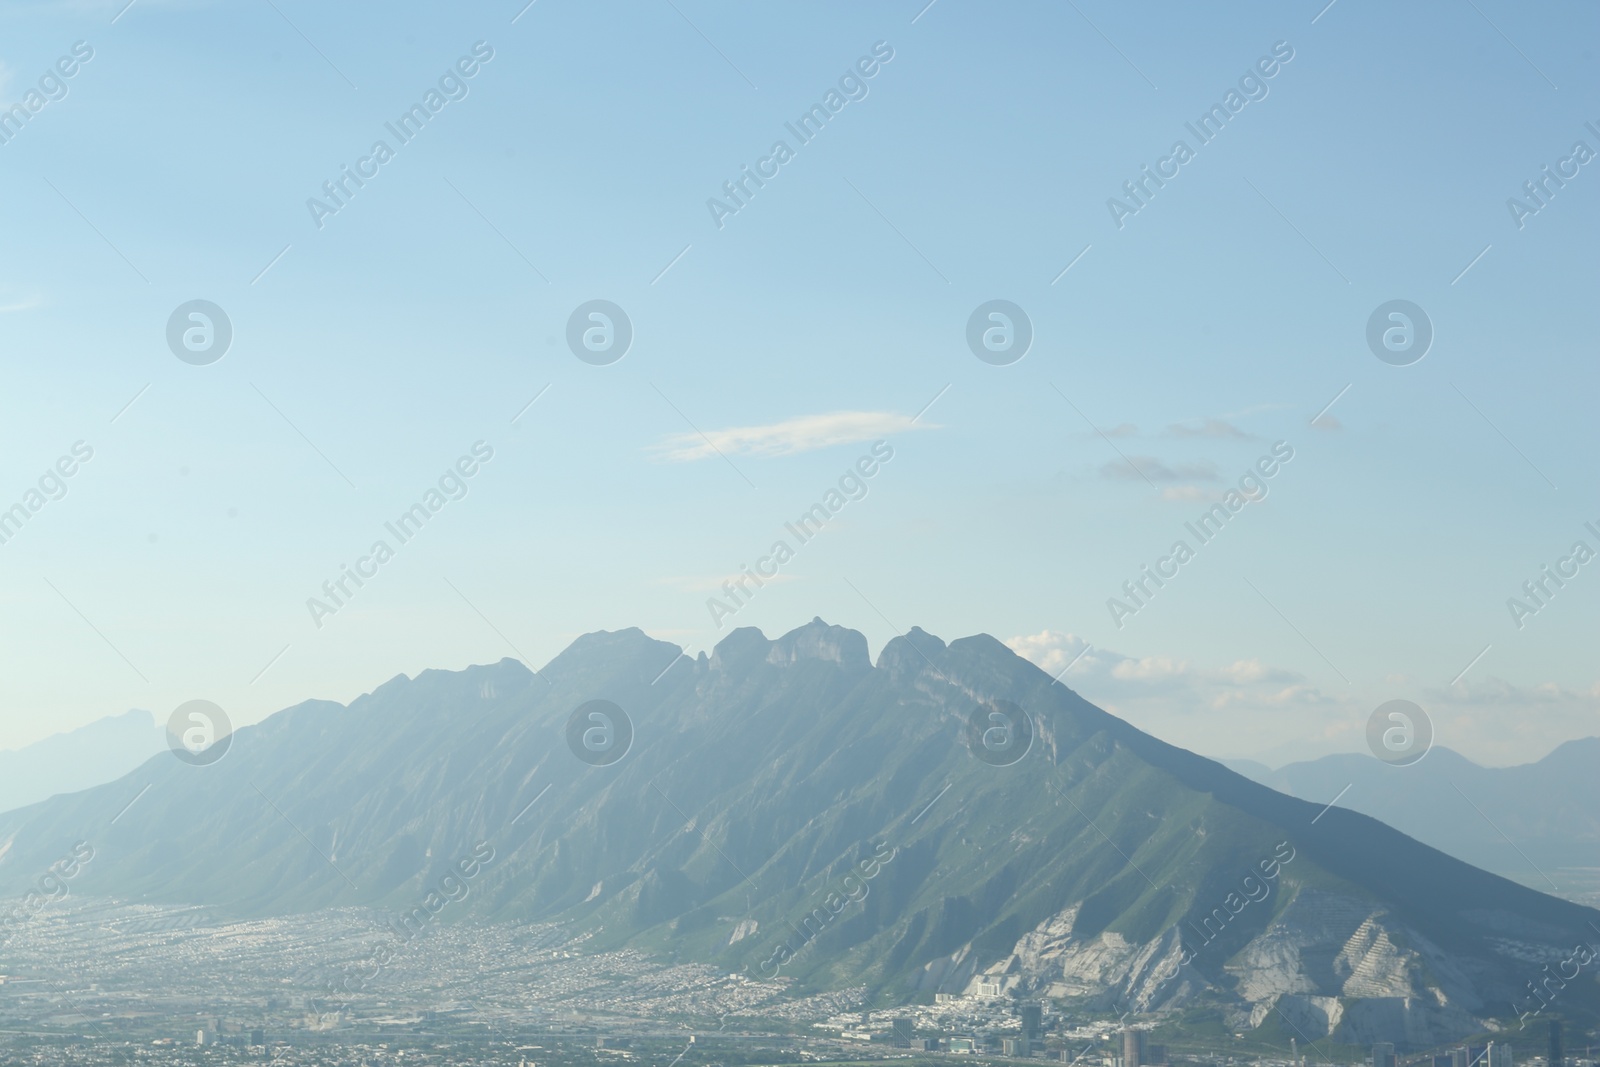 Photo of Big mountains and city under blue sky on sunny day